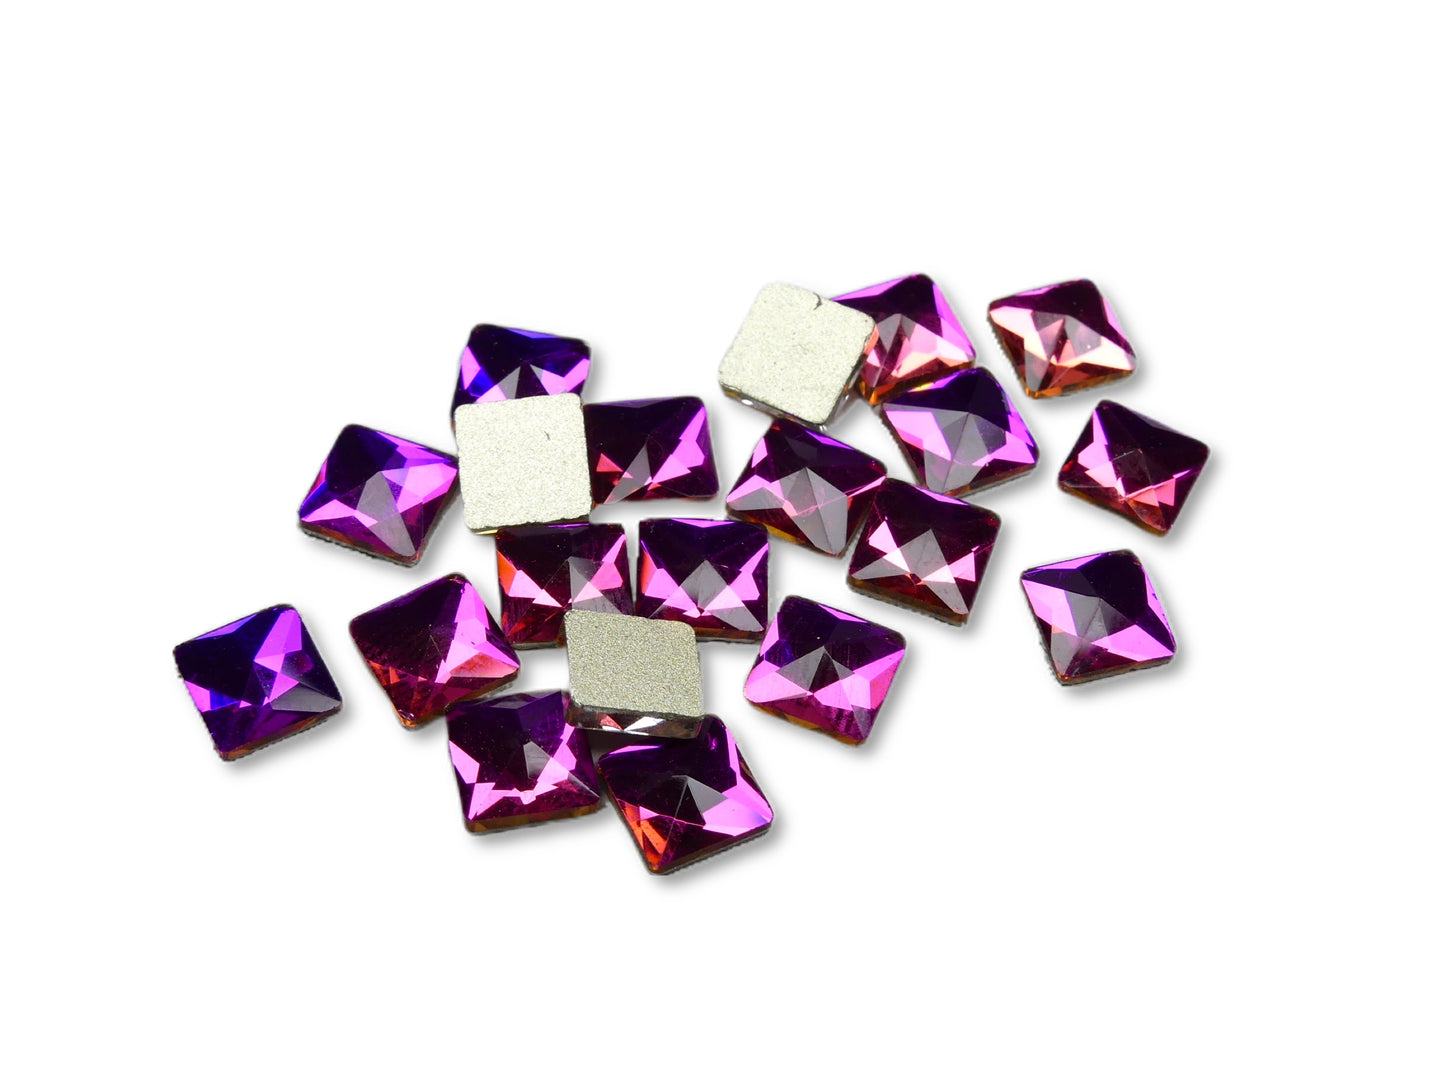 Crystals - Square - 20ct - My Little Nail Art Shop